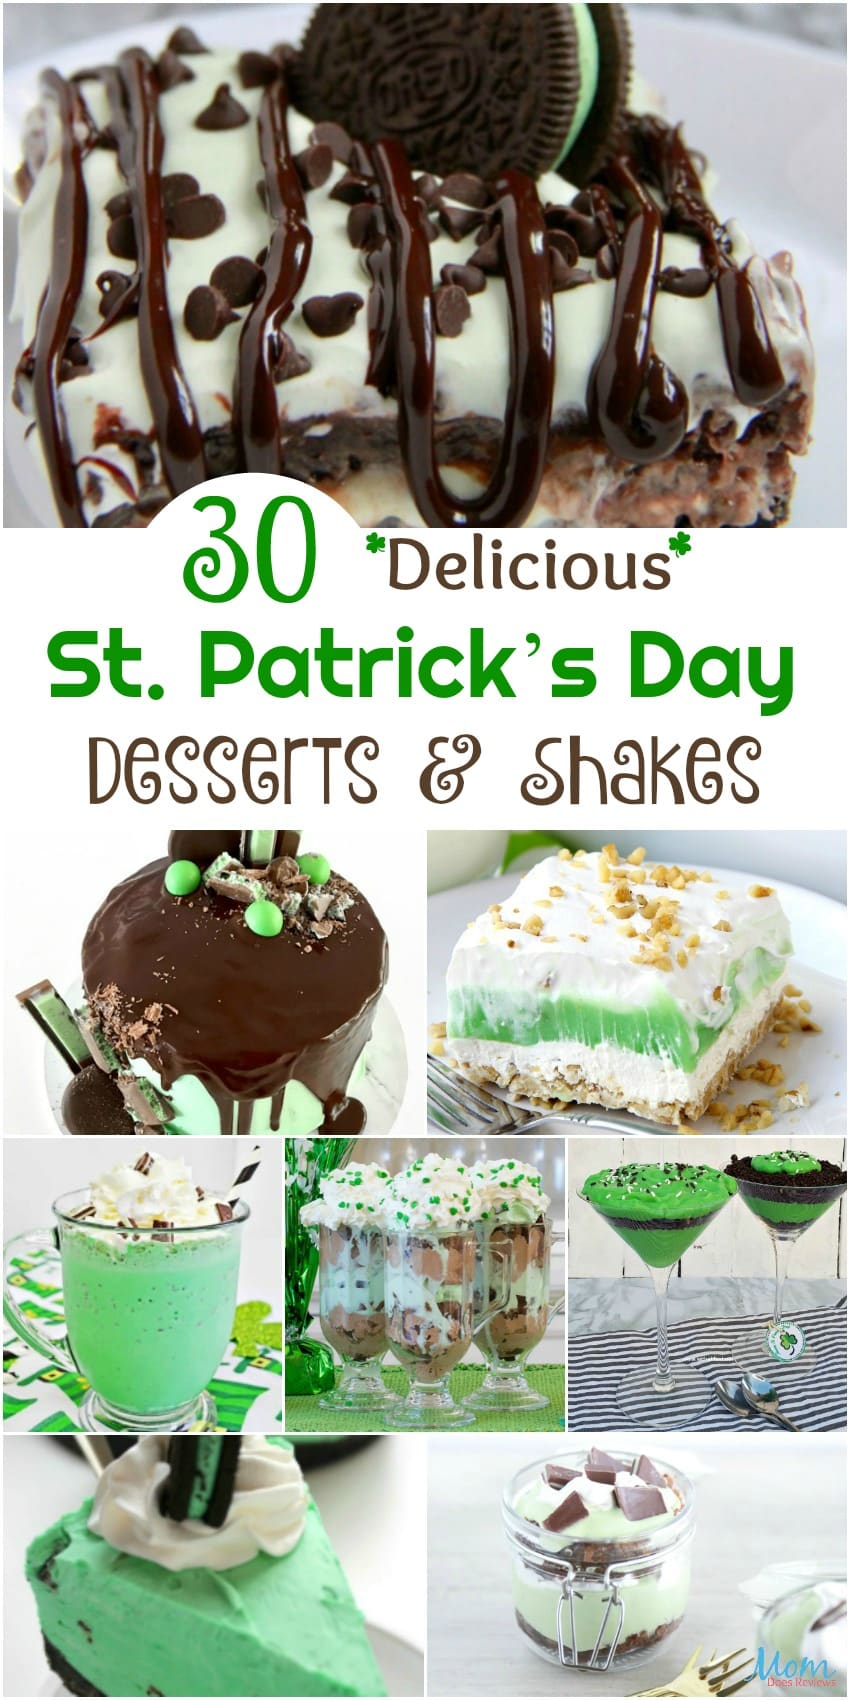 30 Delicious St. Patrick’s Day Desserts & Shakes You Will Love  #desserts #sweets #recipes #shakes #stpattysday